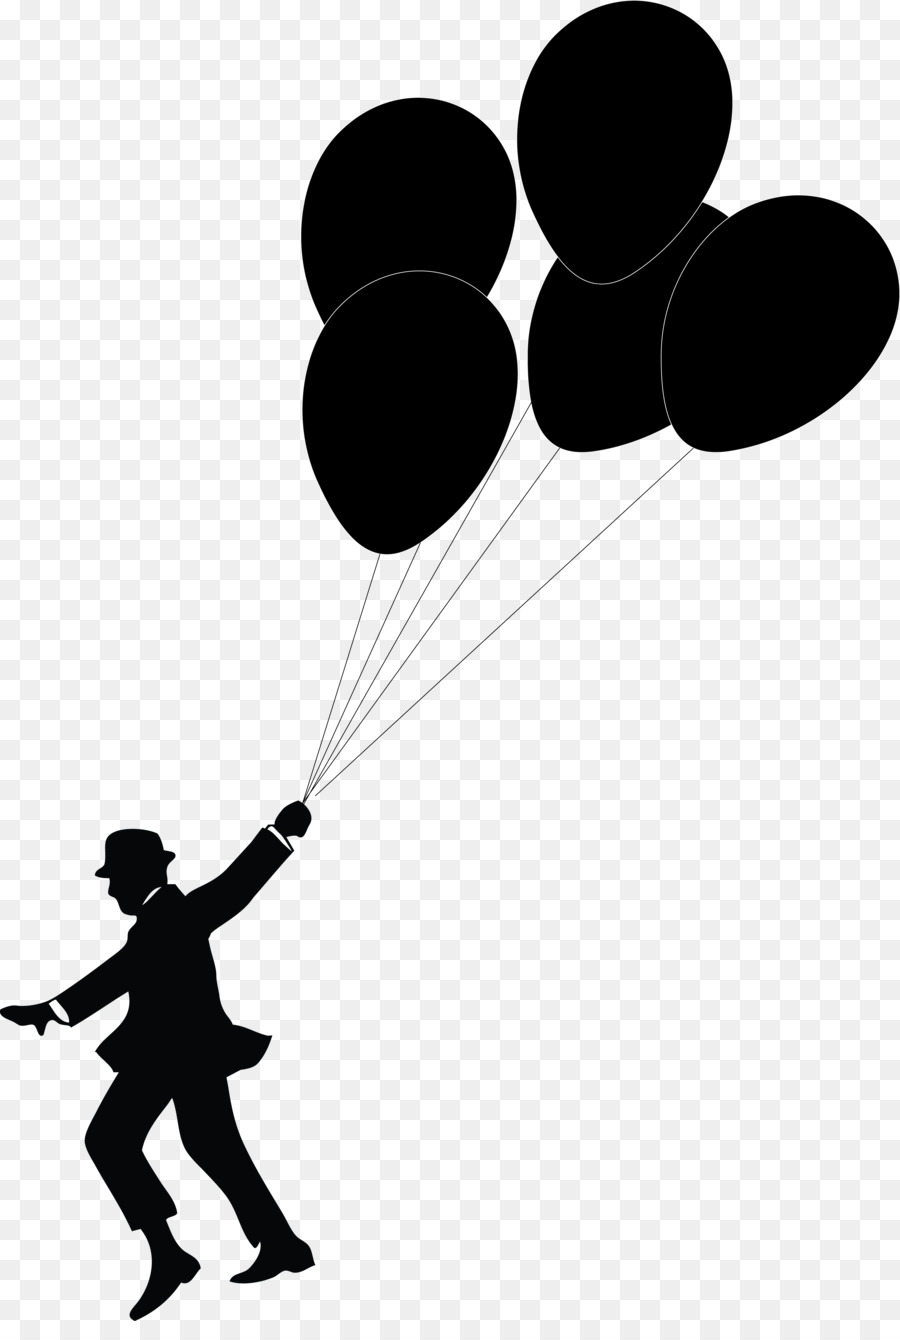 Balloon Silhouette Black and white Child Clip art - balloons png download - 5498*8067 - Free Transparent Balloon png Download.